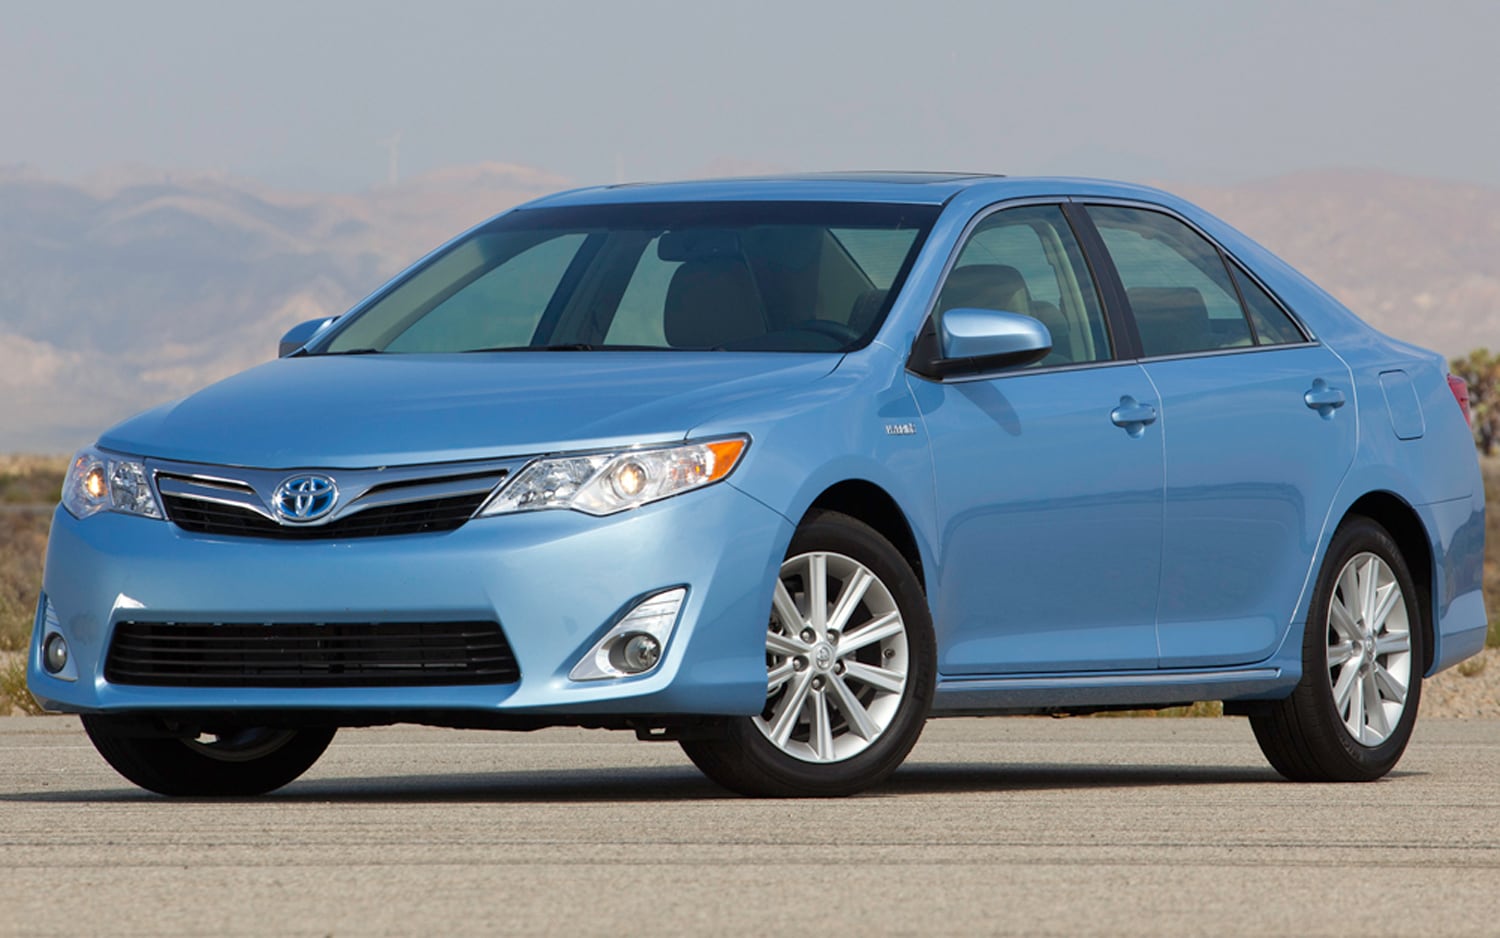 First Test: 2012 Toyota Camry Hybrid XLE